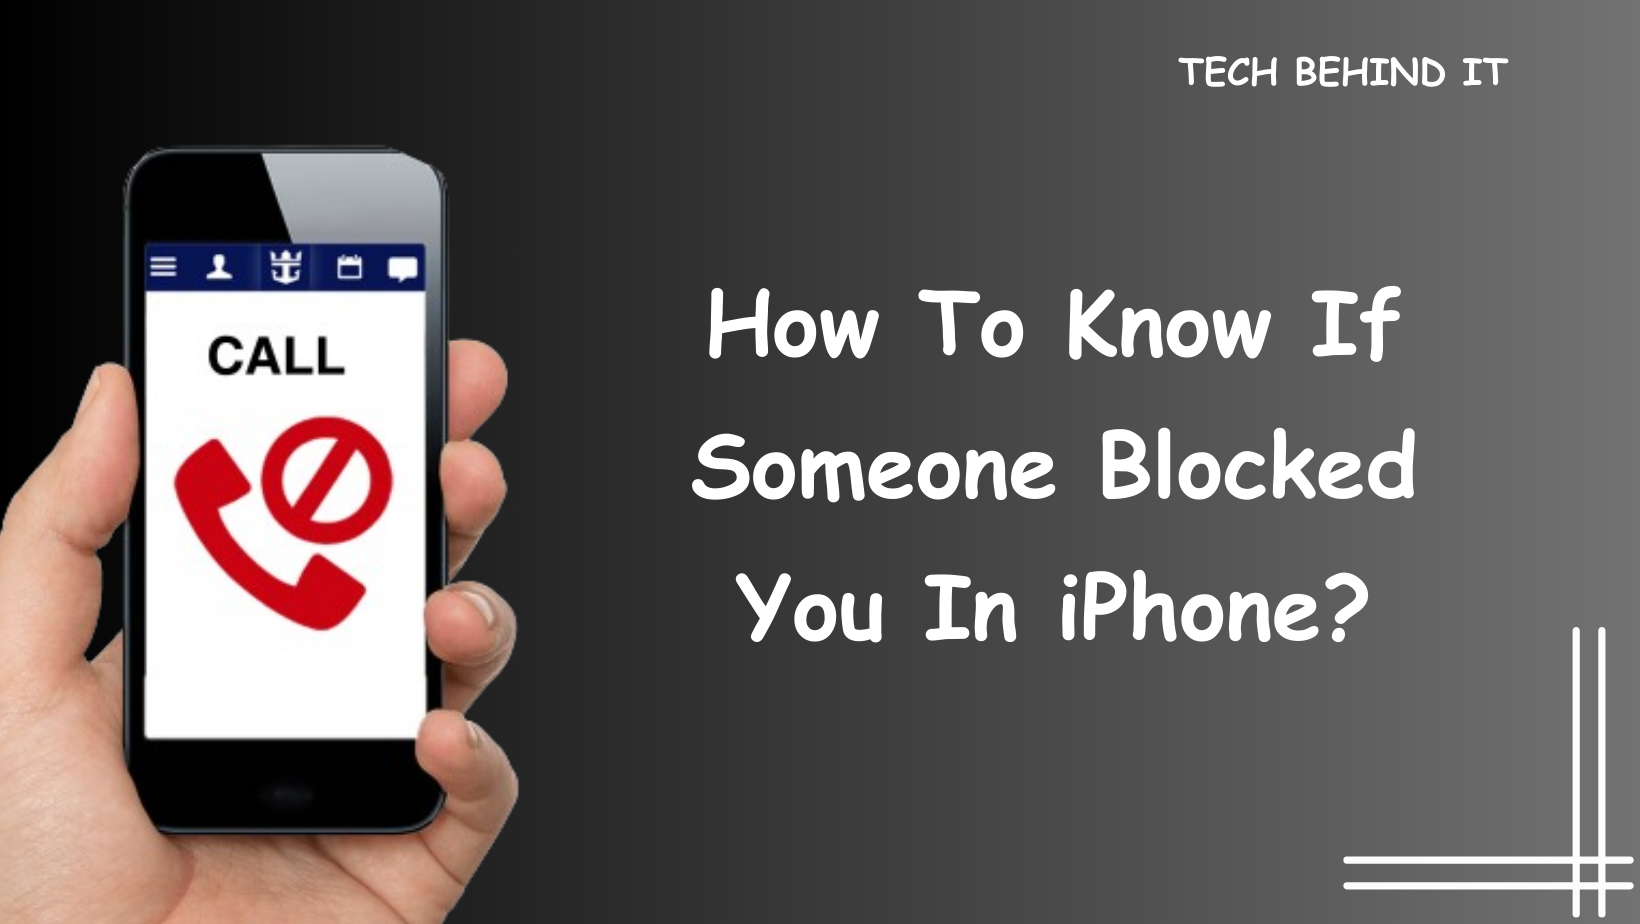 How To Know If Someone Blocked You In iPhone?